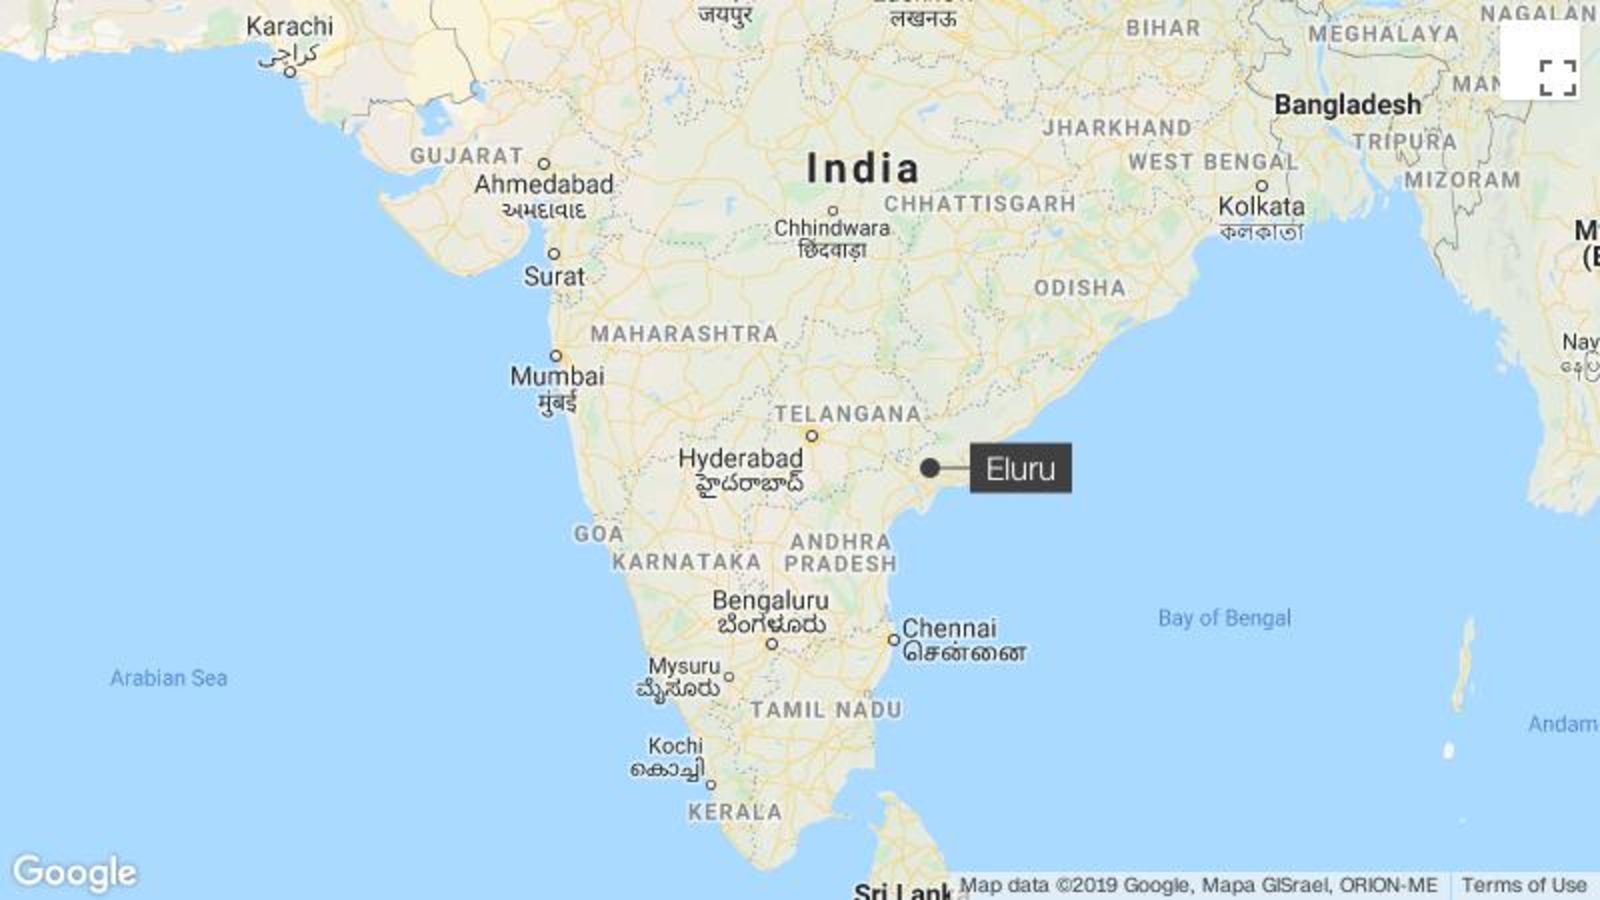 Cyanide was used to kill 10 people, police in India say - CNN